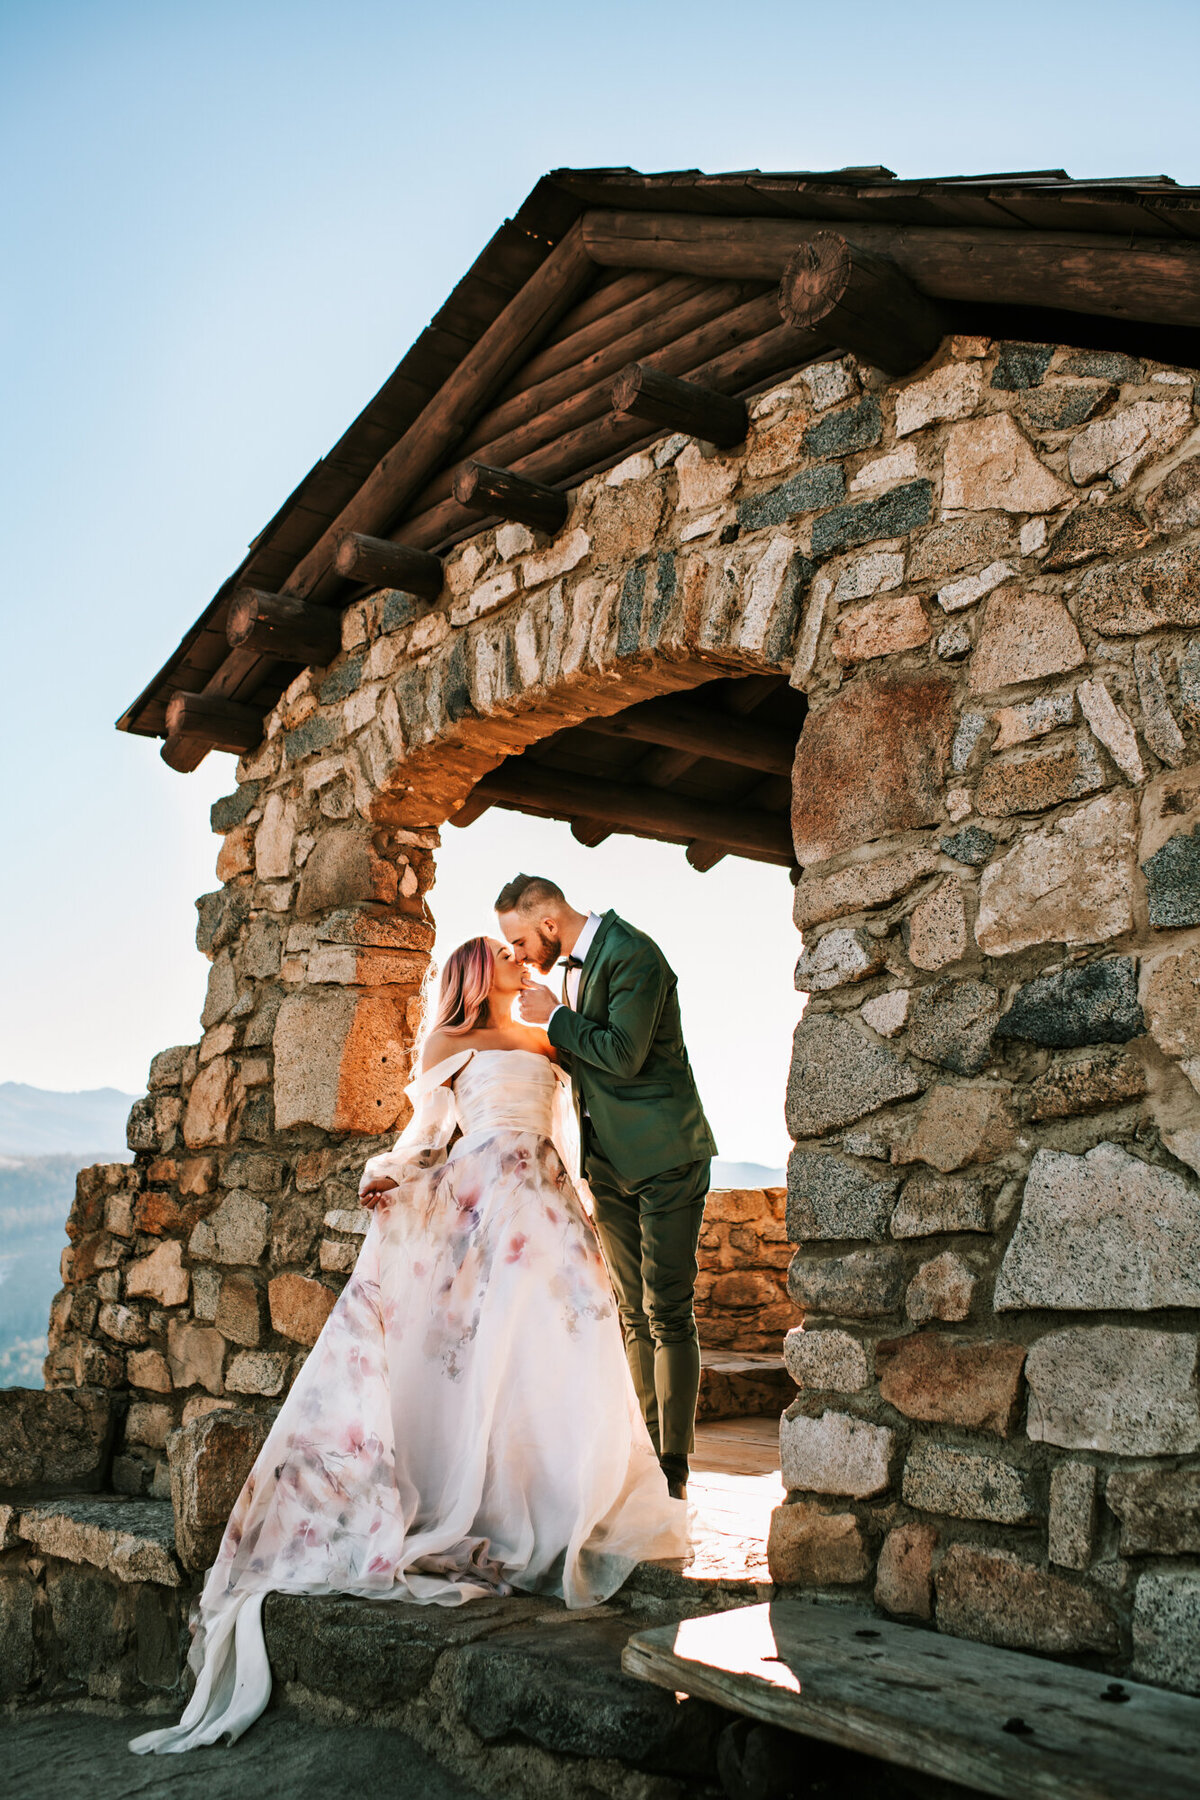 Couples Photography, Man in a blue shirt holding the face of a woman in a wedding dress while they stand in a beautiful stone structure on top of a mountain